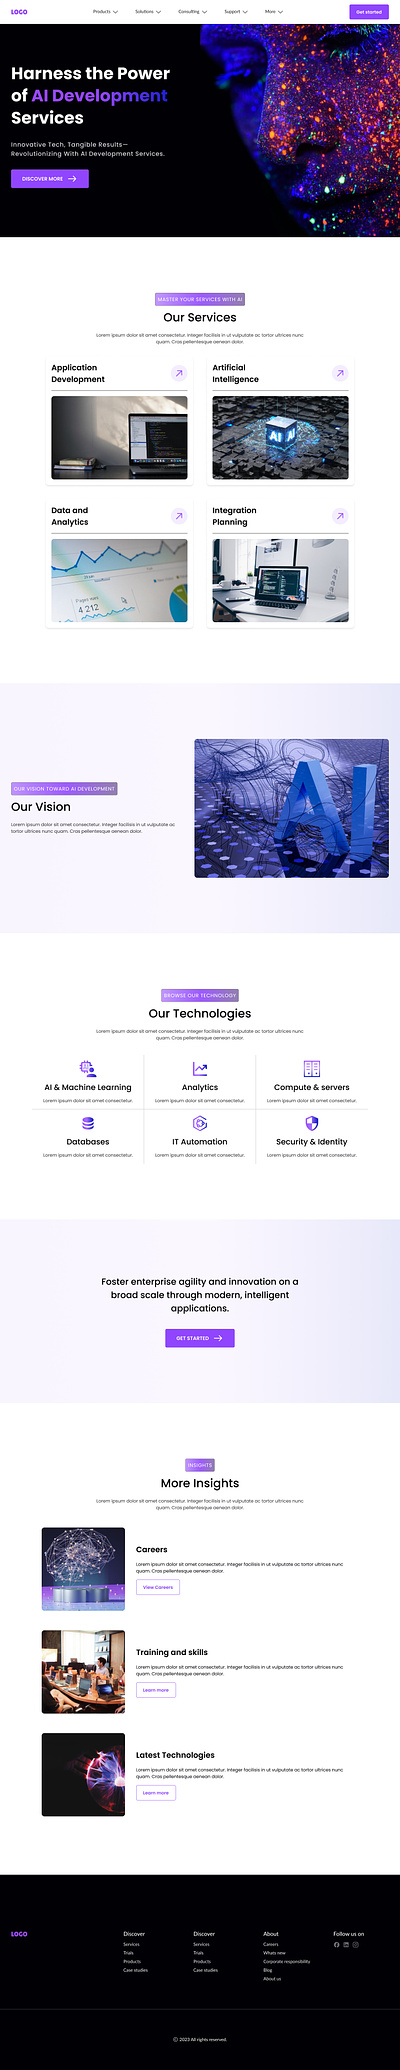 AI Service Agency: Crafted an Engaging Landing Page Design aiagency aiservice artificialintelligence creativedesign digitalmarketing home page design landingpagedesign onlinepresence service landing page techinnovation userexperience webdesign